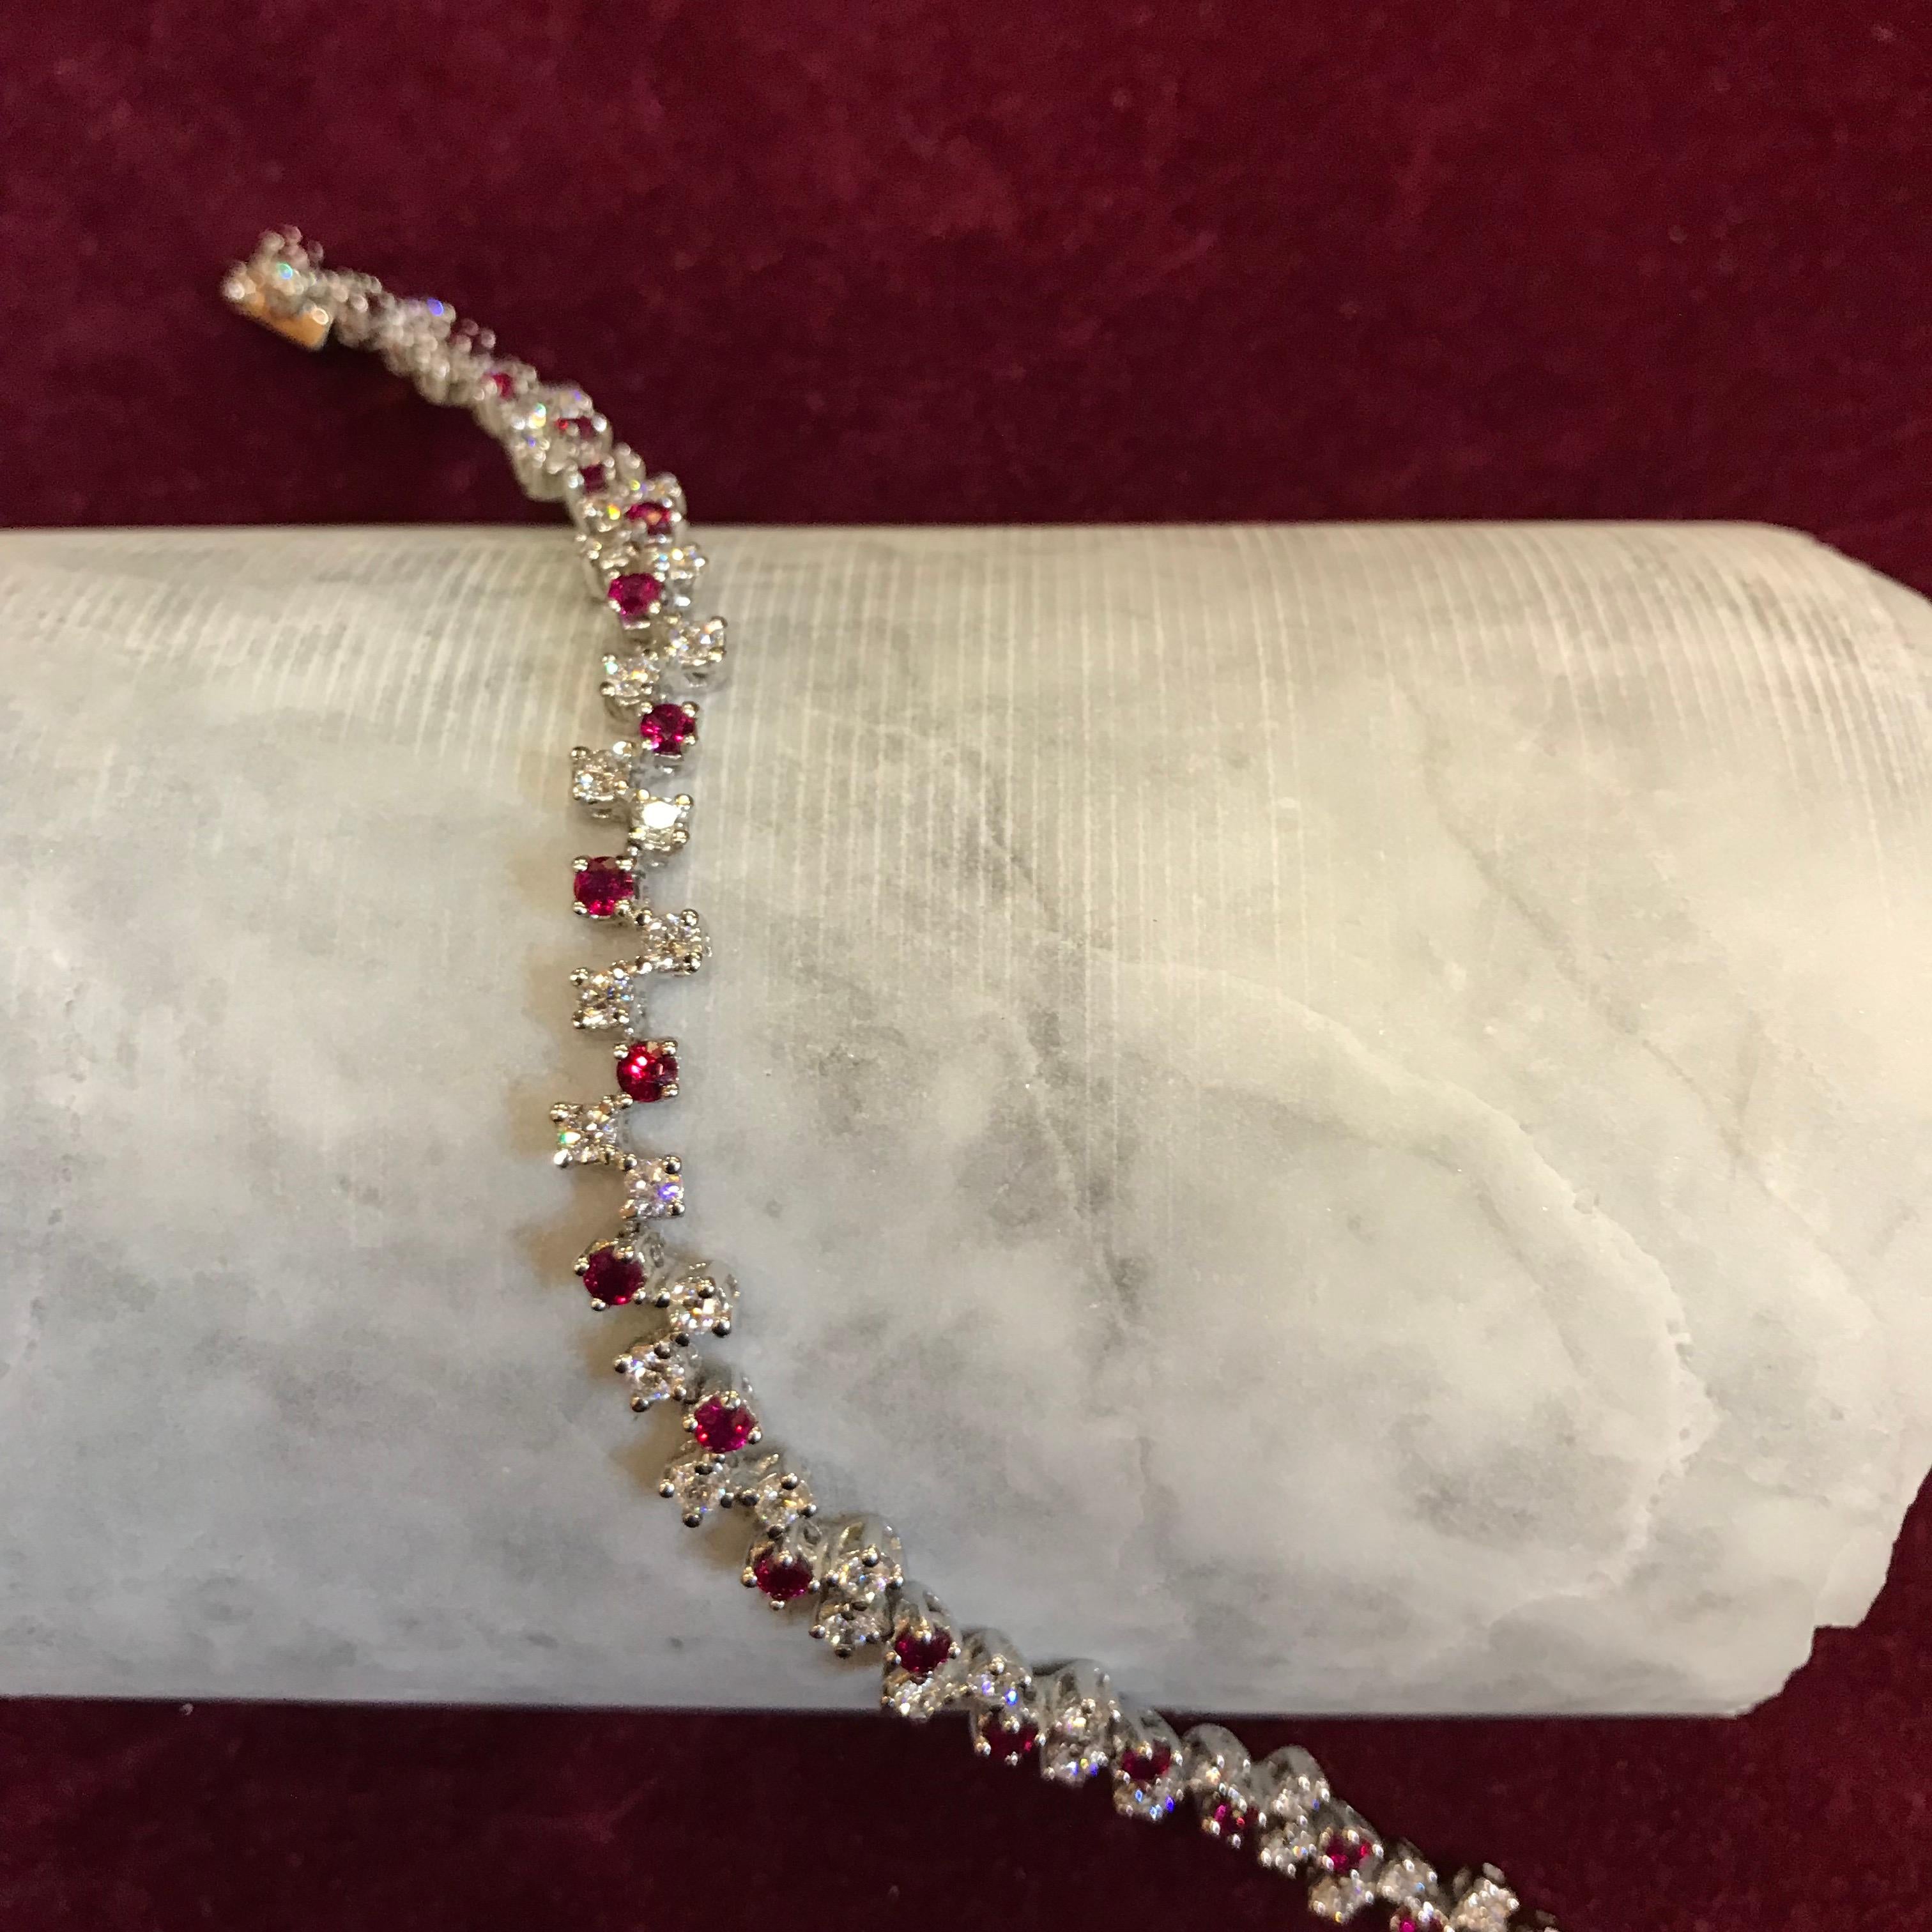 A modern take on the classic Diamond Tennis bracelet and with a little pop of colour. Handmade in our Italian workshop by a fifth generation goldsmith, 23 White VVS-F Diamonds and 21 Rubies are set in 18kt White Gold. The double clasp means that is